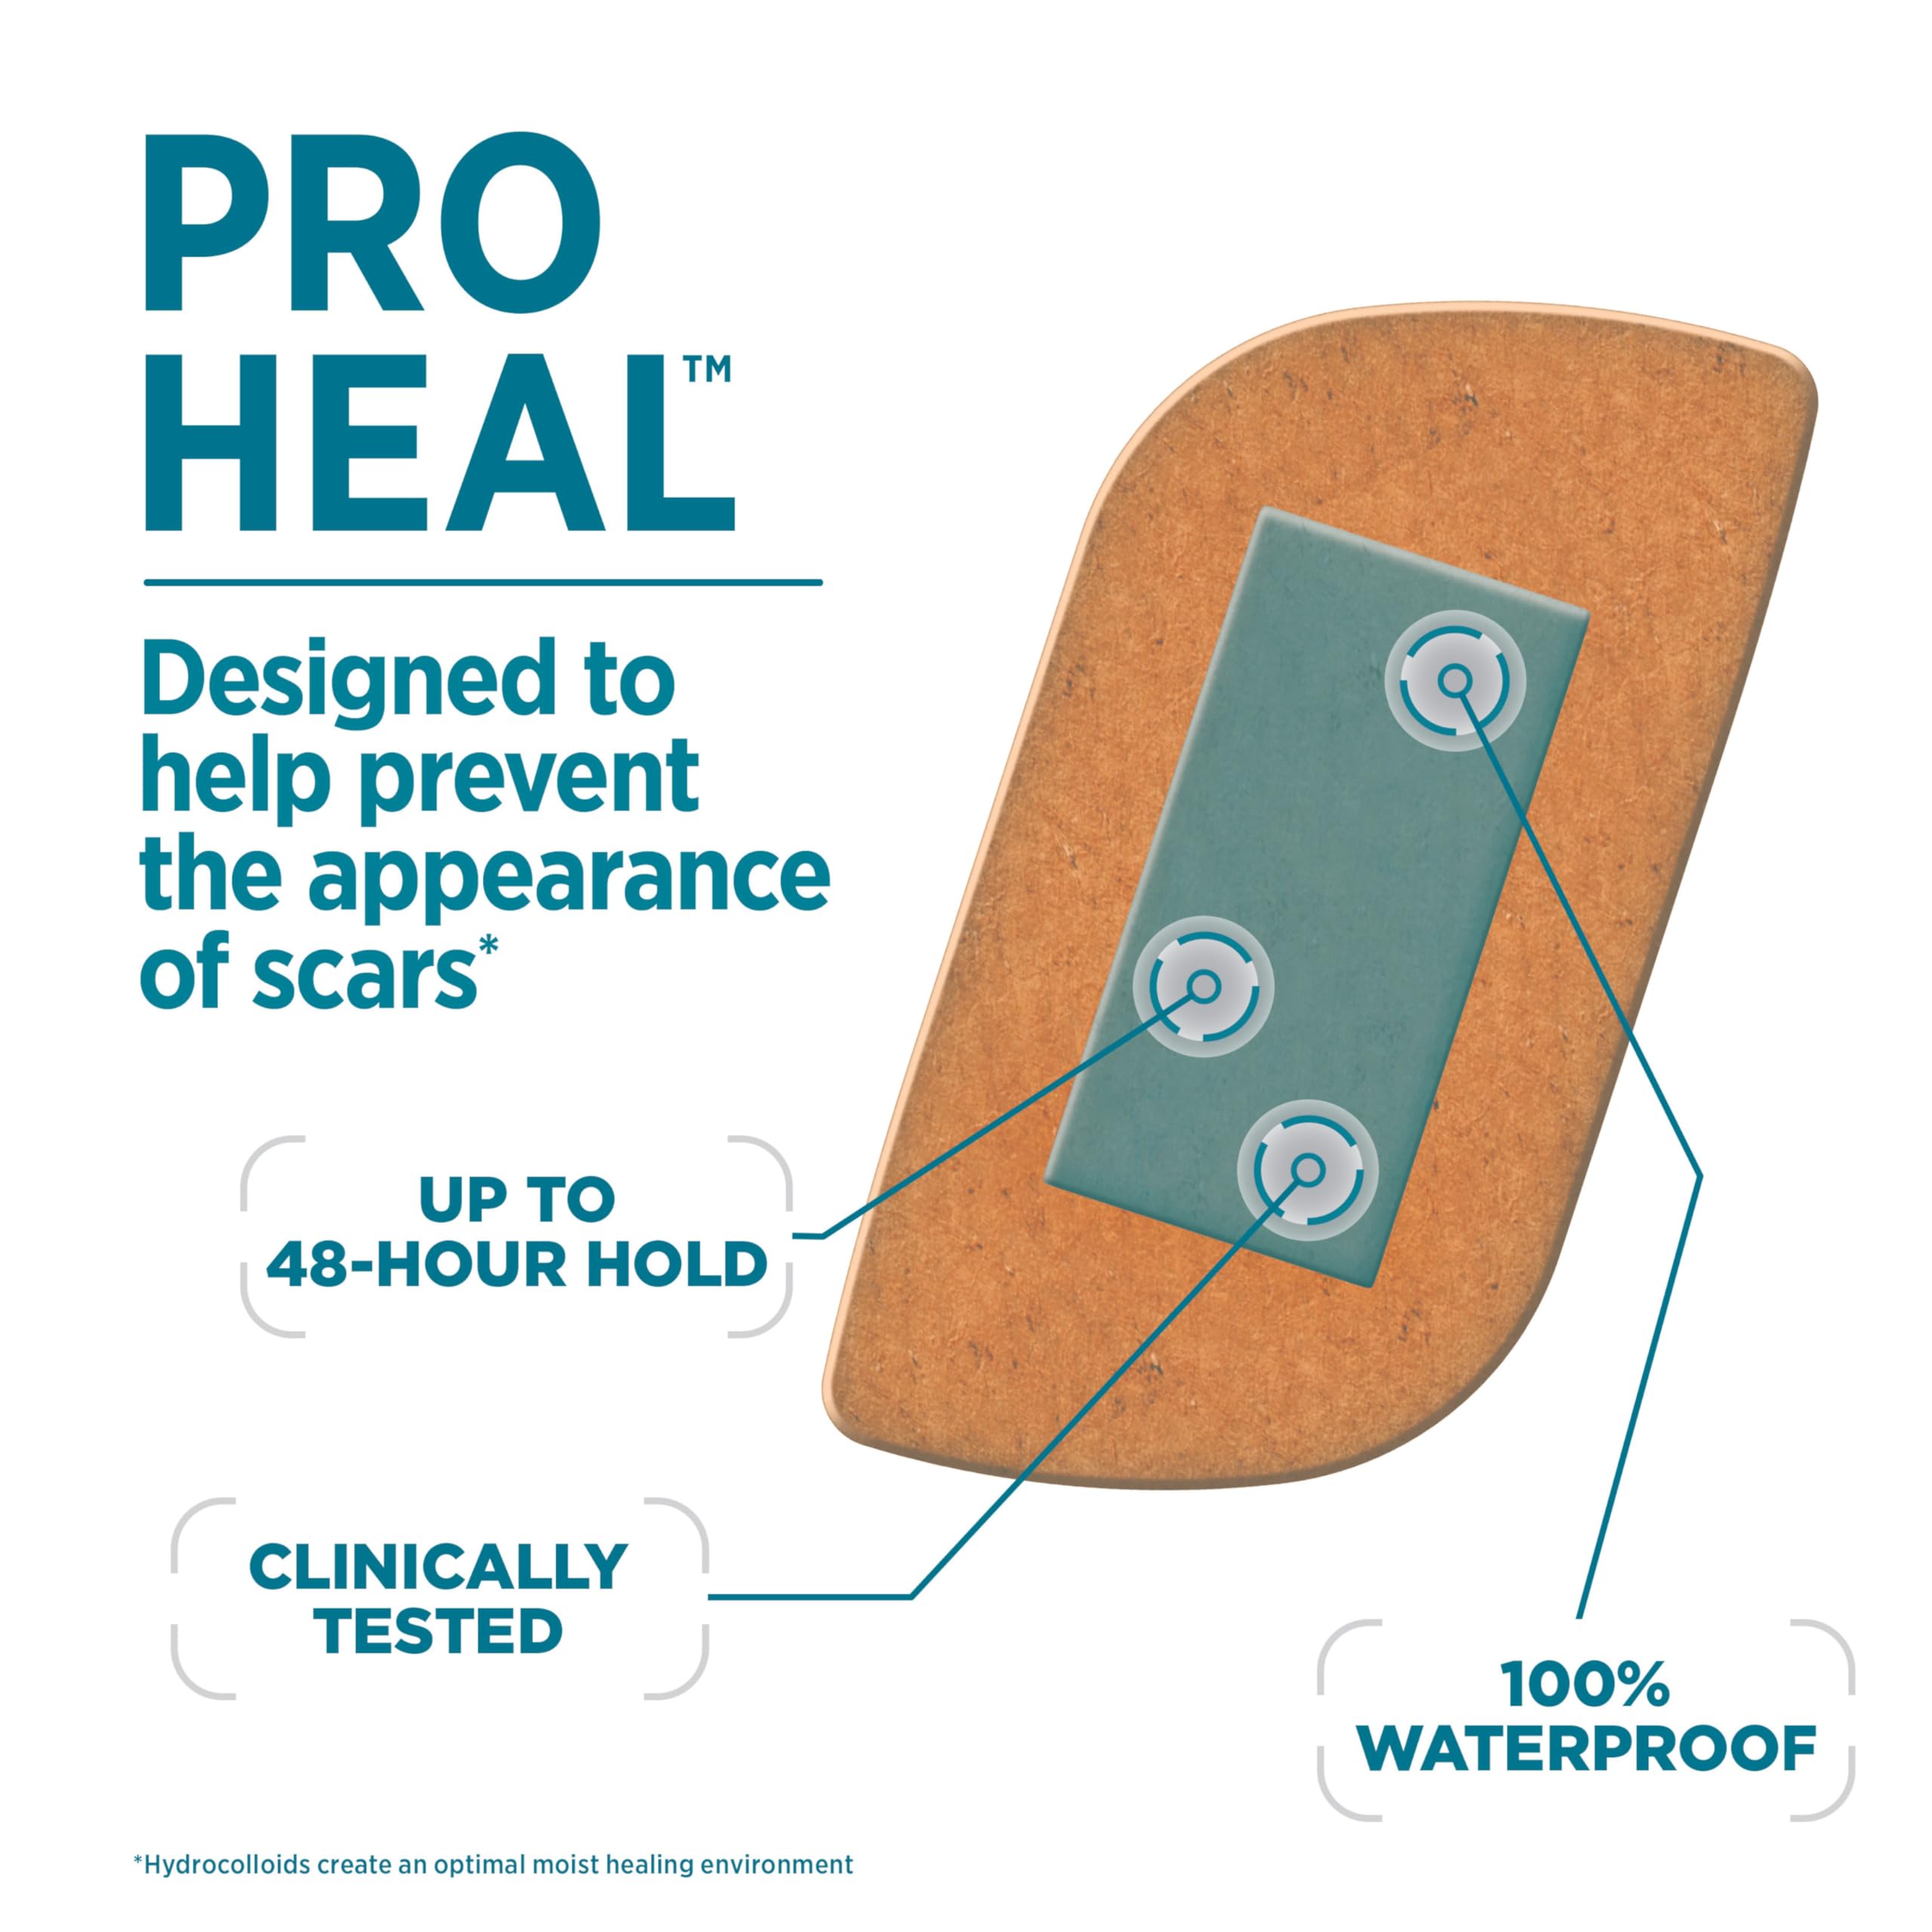 Band-Aid Brand Pro Heal Adhesive Bandages with Hydrocolloid Gel Pads, Large Clinically Tested Waterproof Bandages for Better Healing of Minor Wounds, Sterile First Aid Bandages, 5 ct